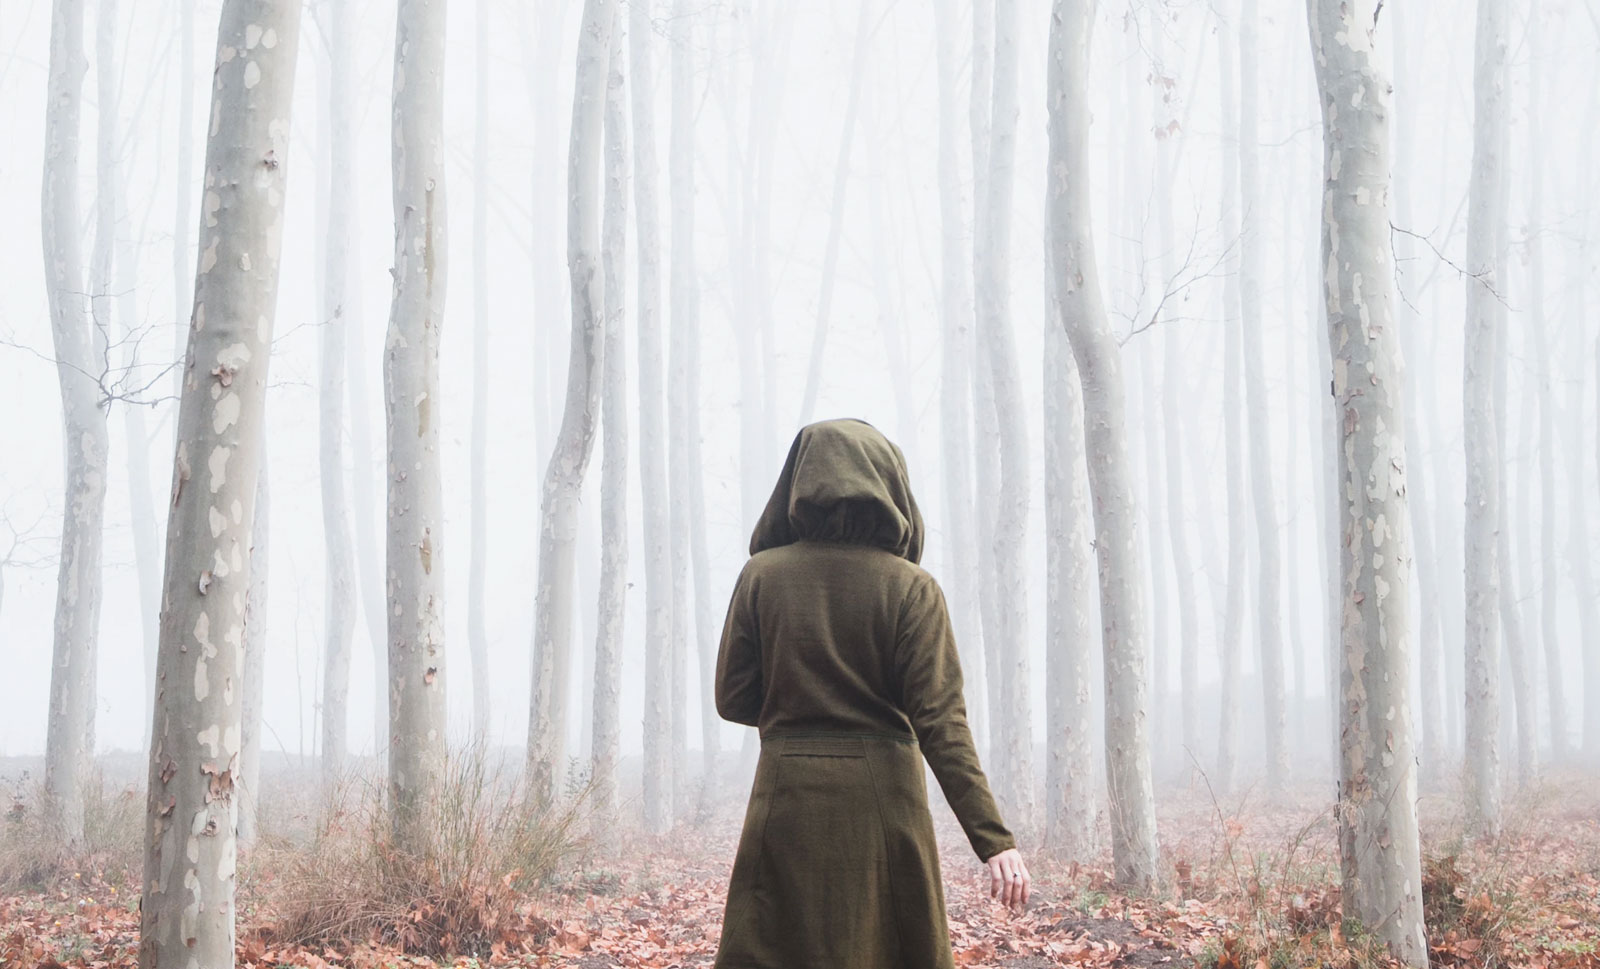 A hooded person in a forest